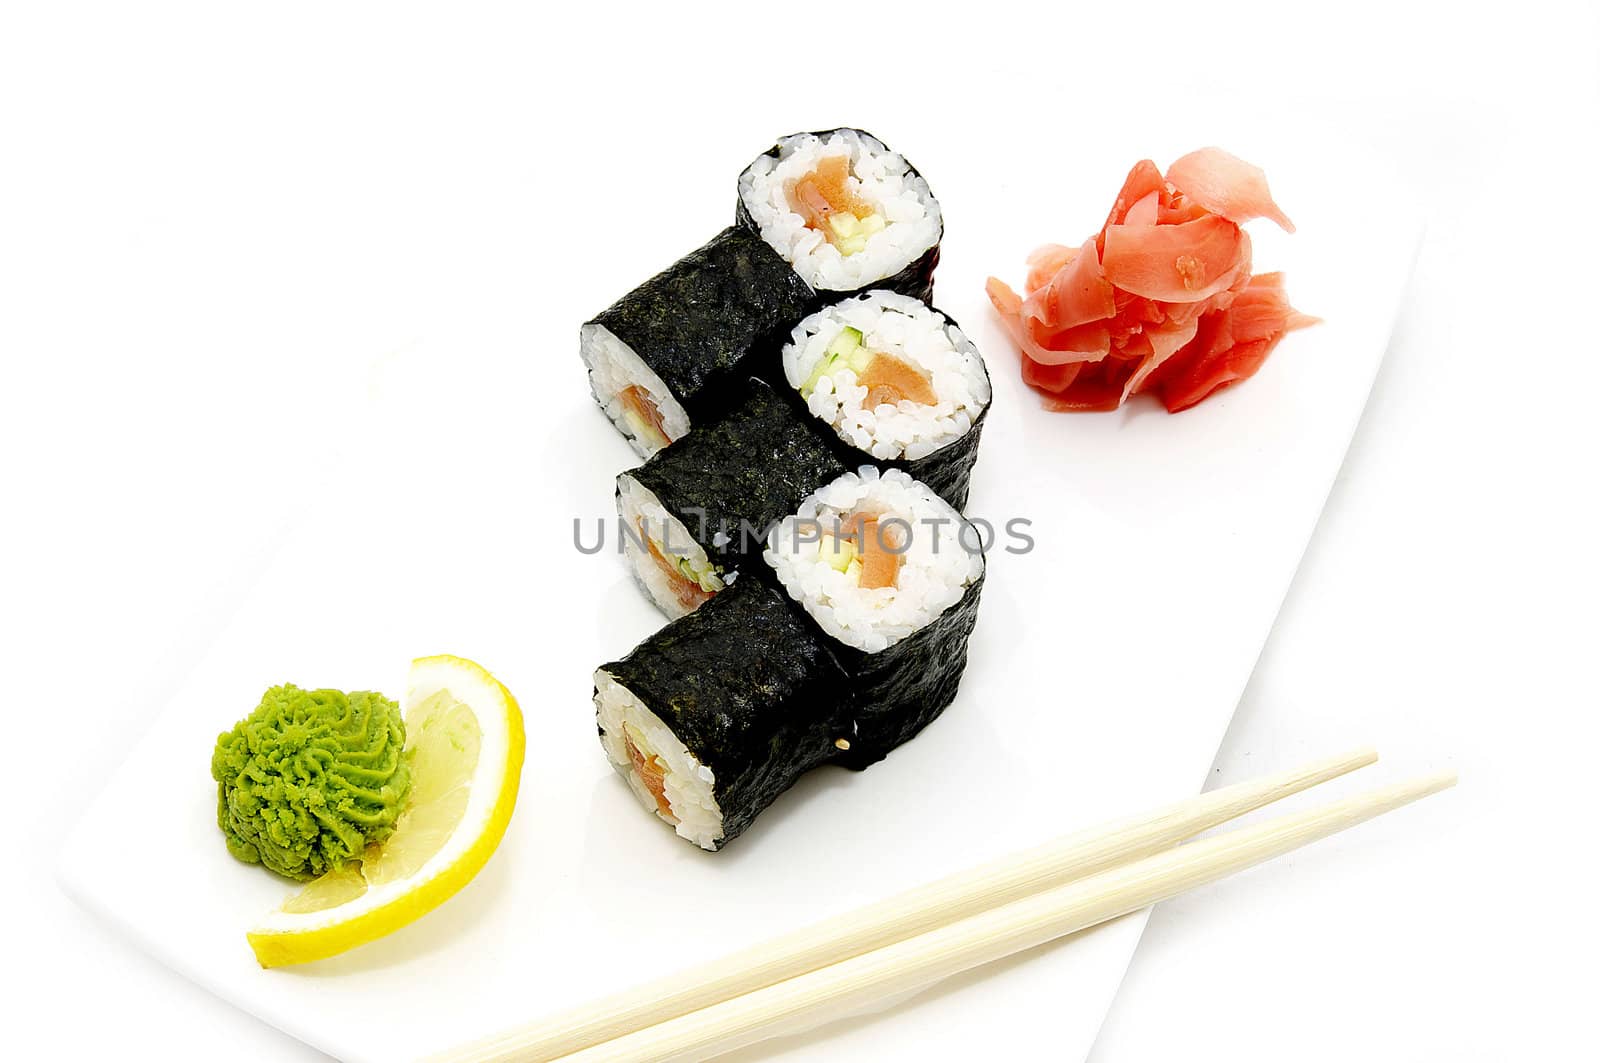 Sushi on a plate with chopsticks on a white background